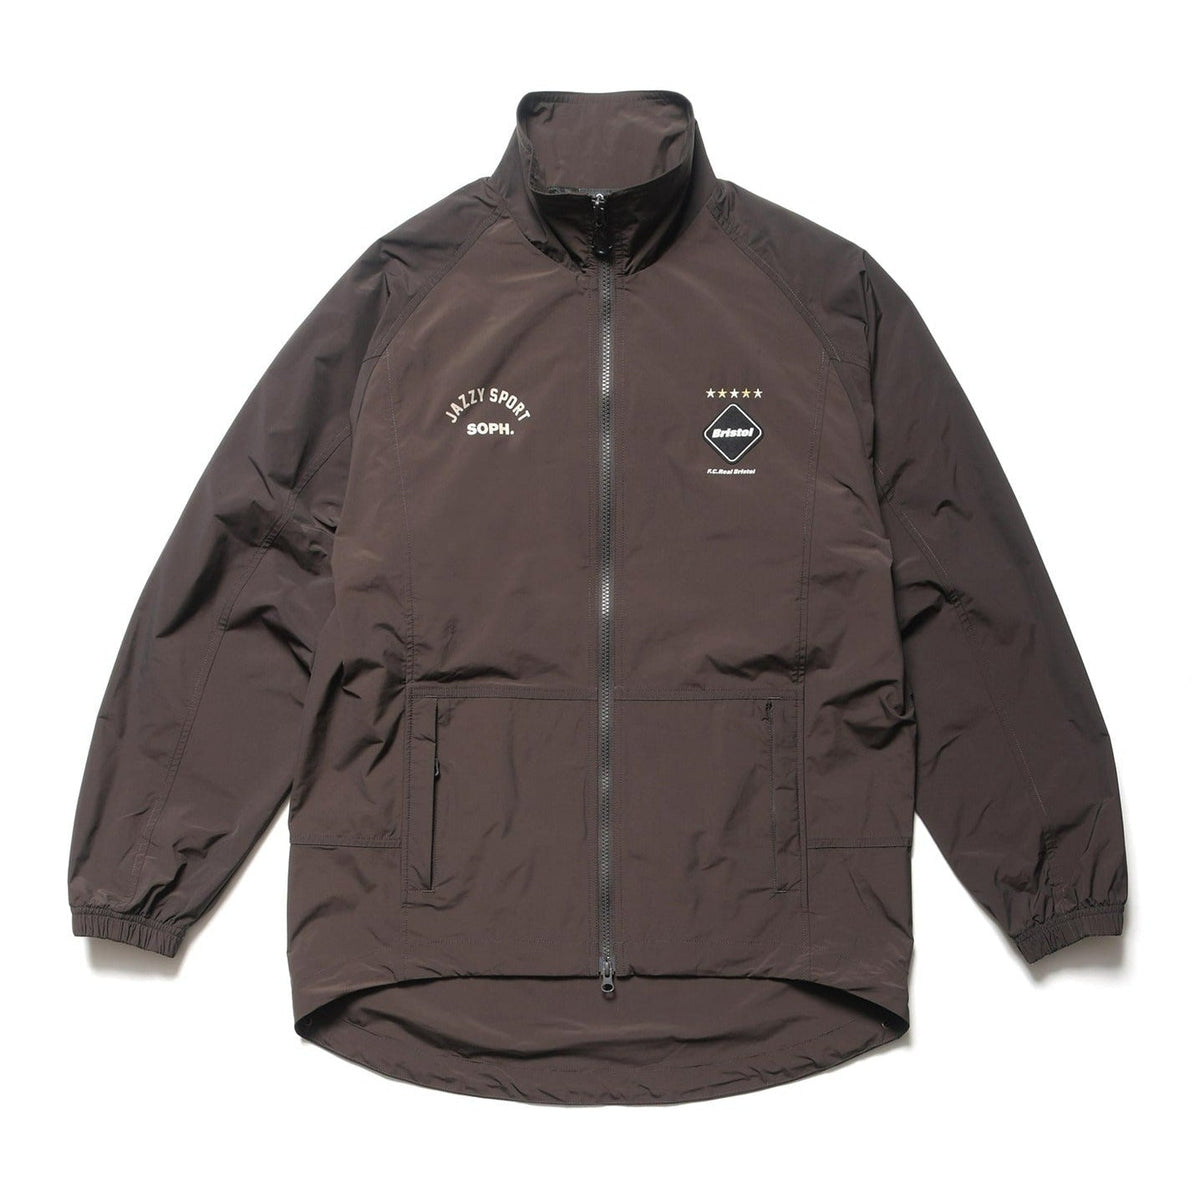 LONG TAIL PRACTICE JACKET fcrb 24ss 新品POLYESTE